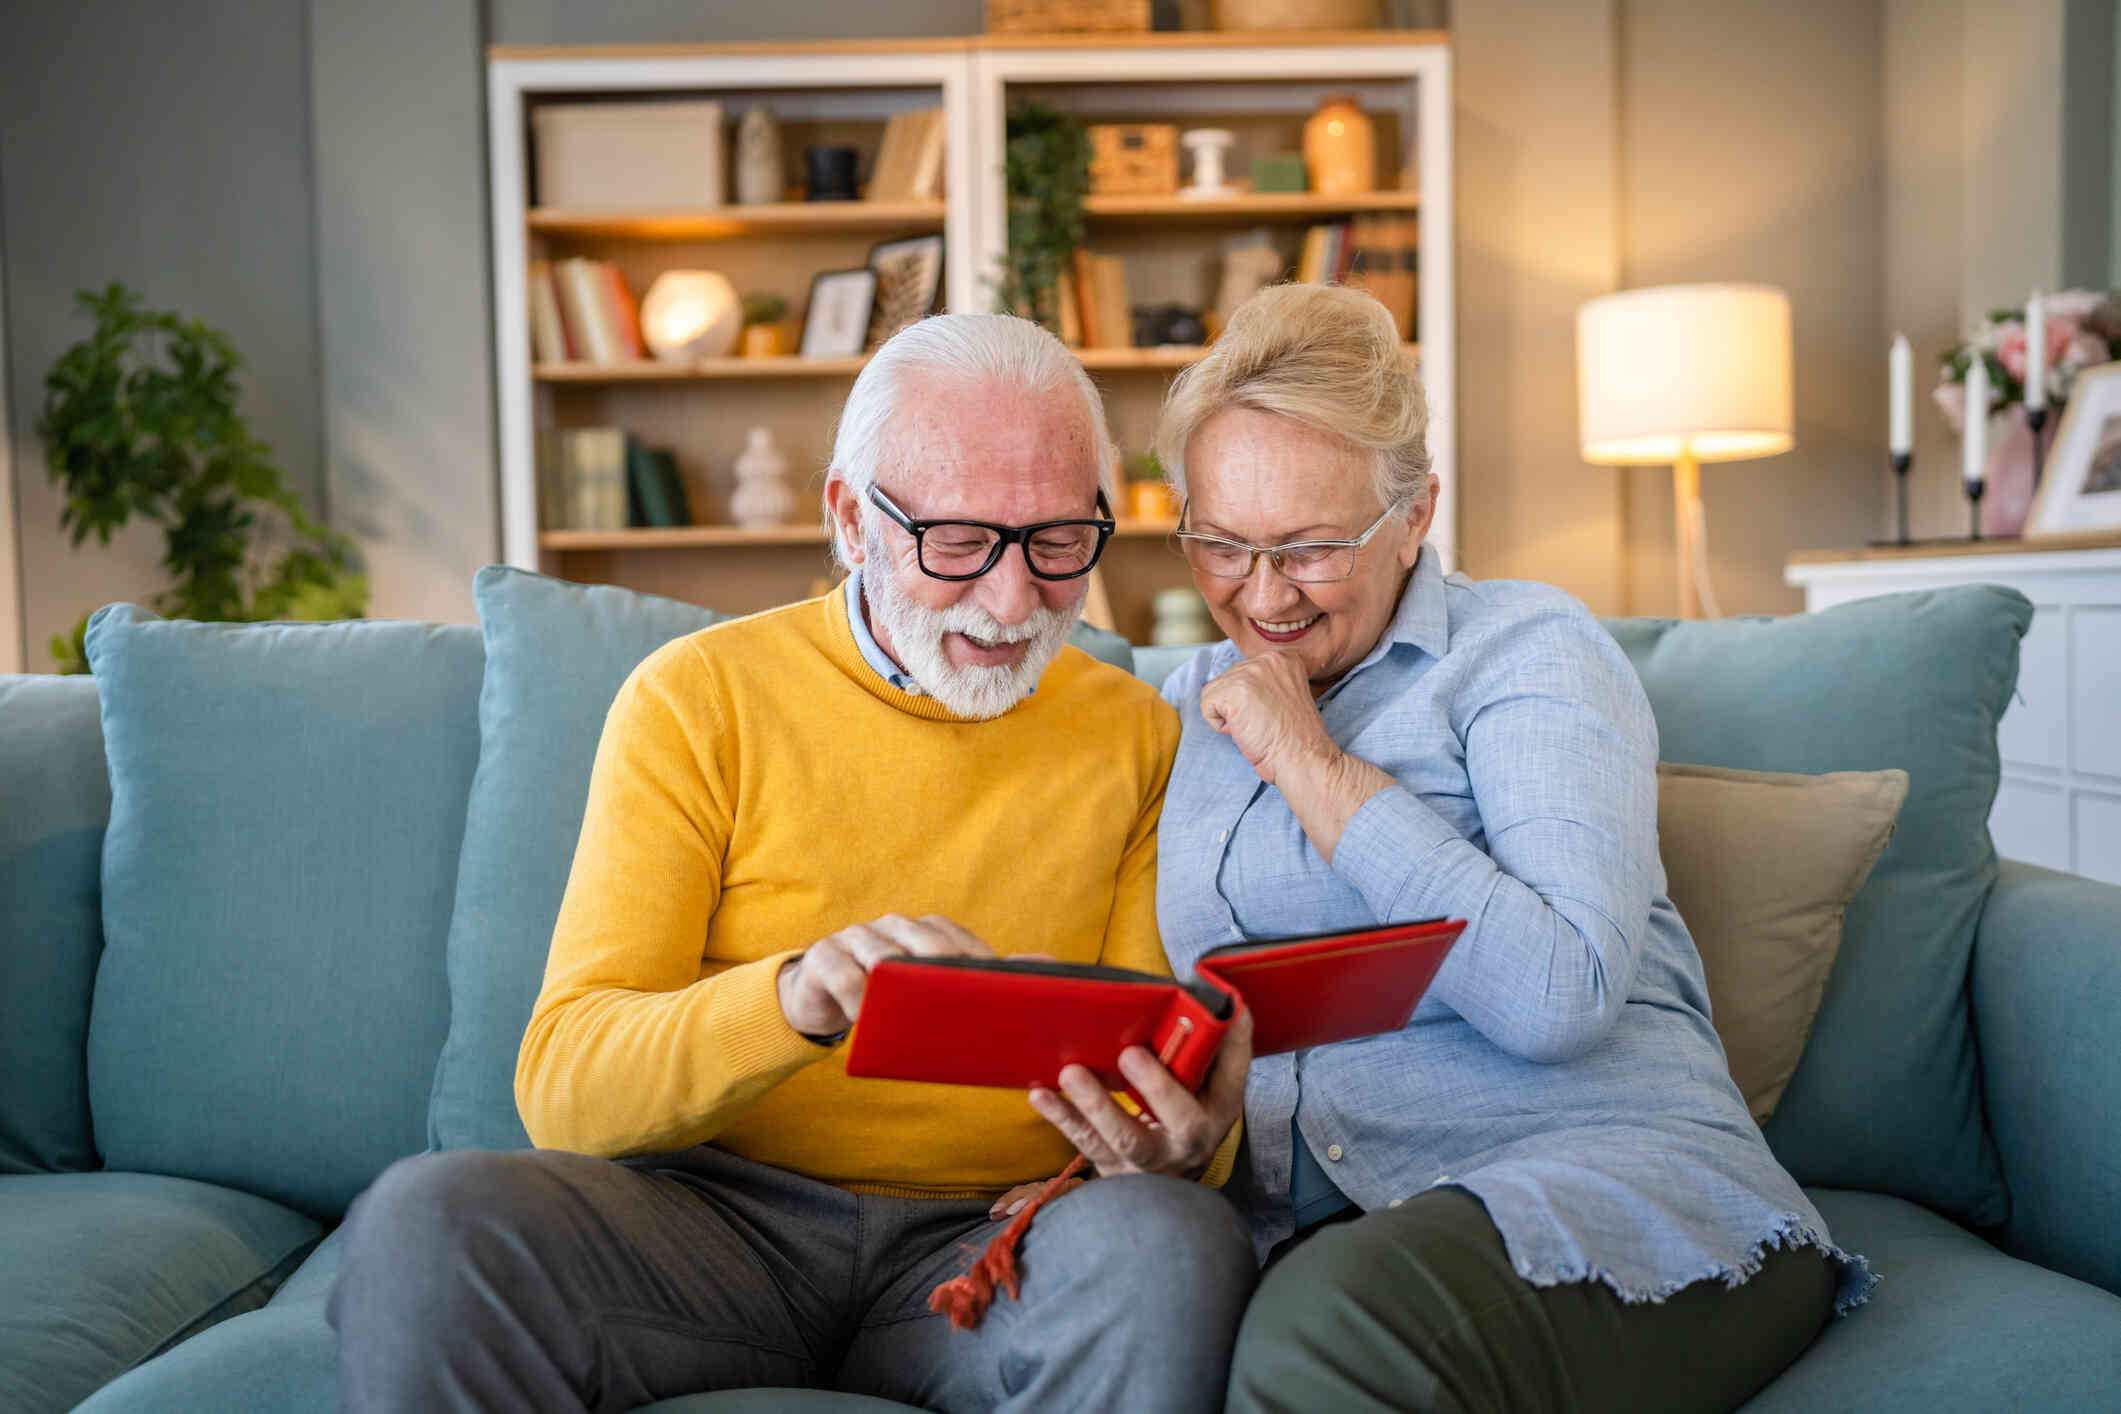 An elderly male and female couple sit side by side on the couch and look at a red photo album together while smiling.